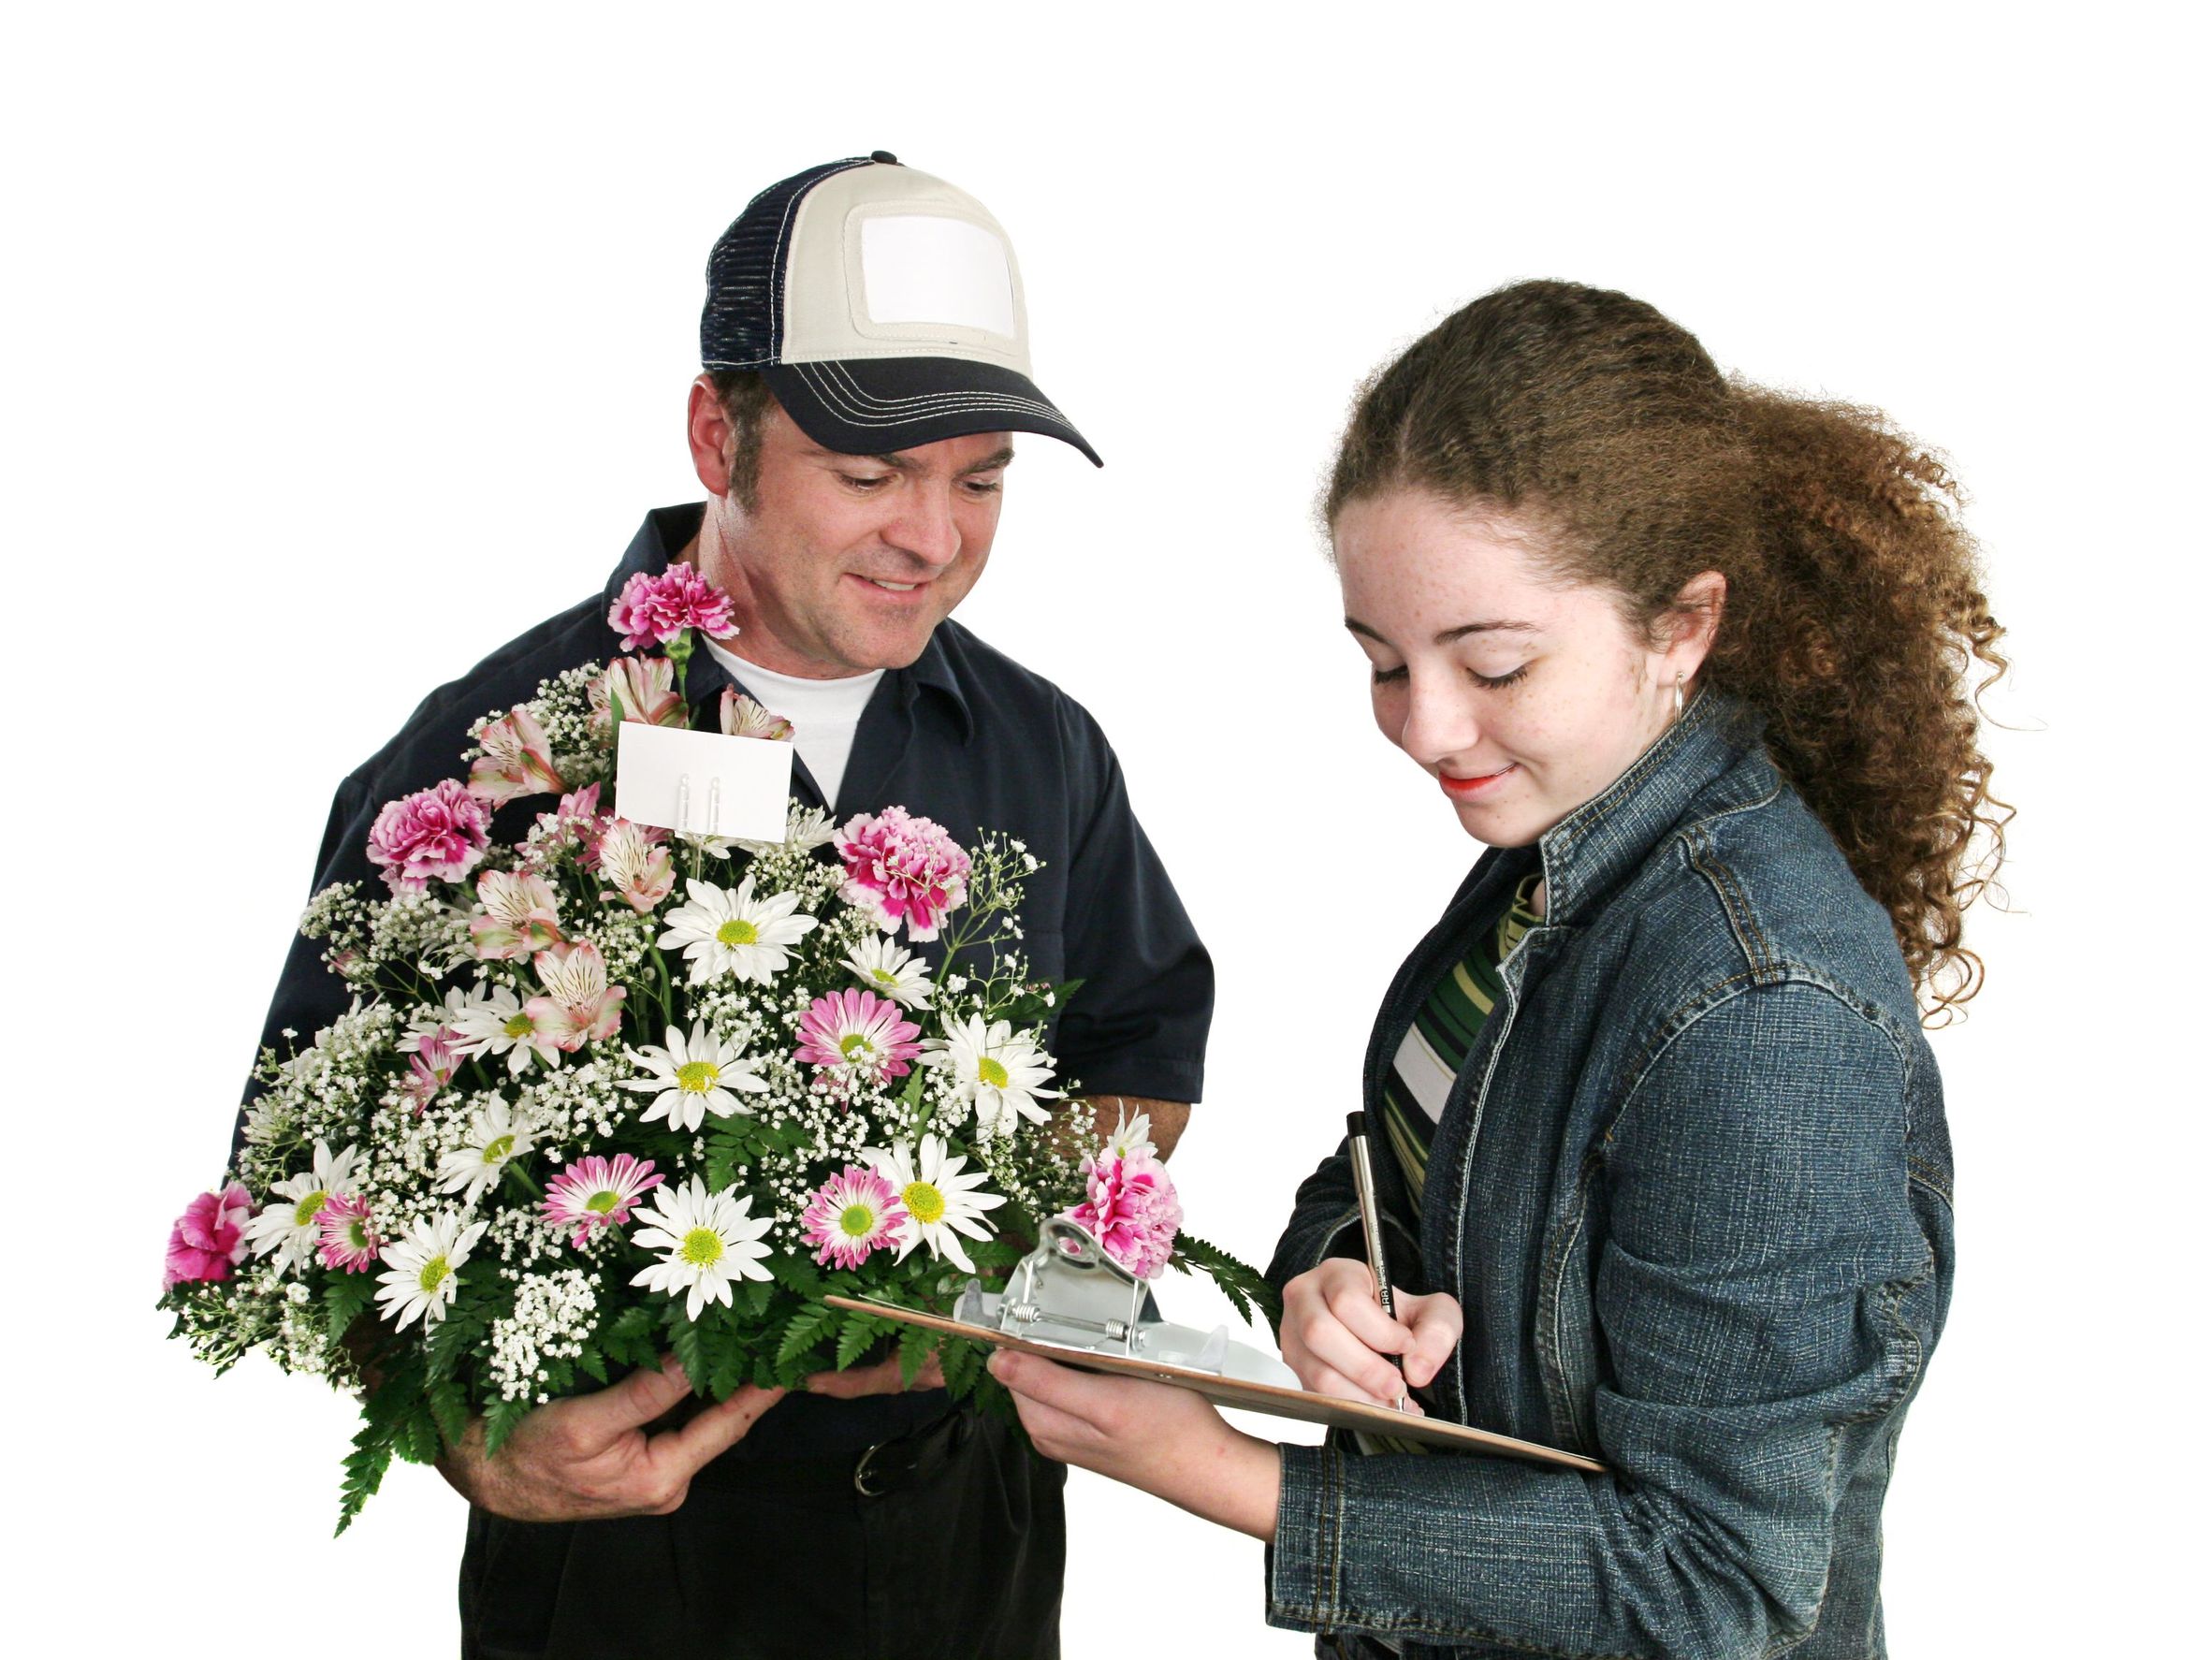 Why You Should Consider Funeral Flower Delivery in Green Bay